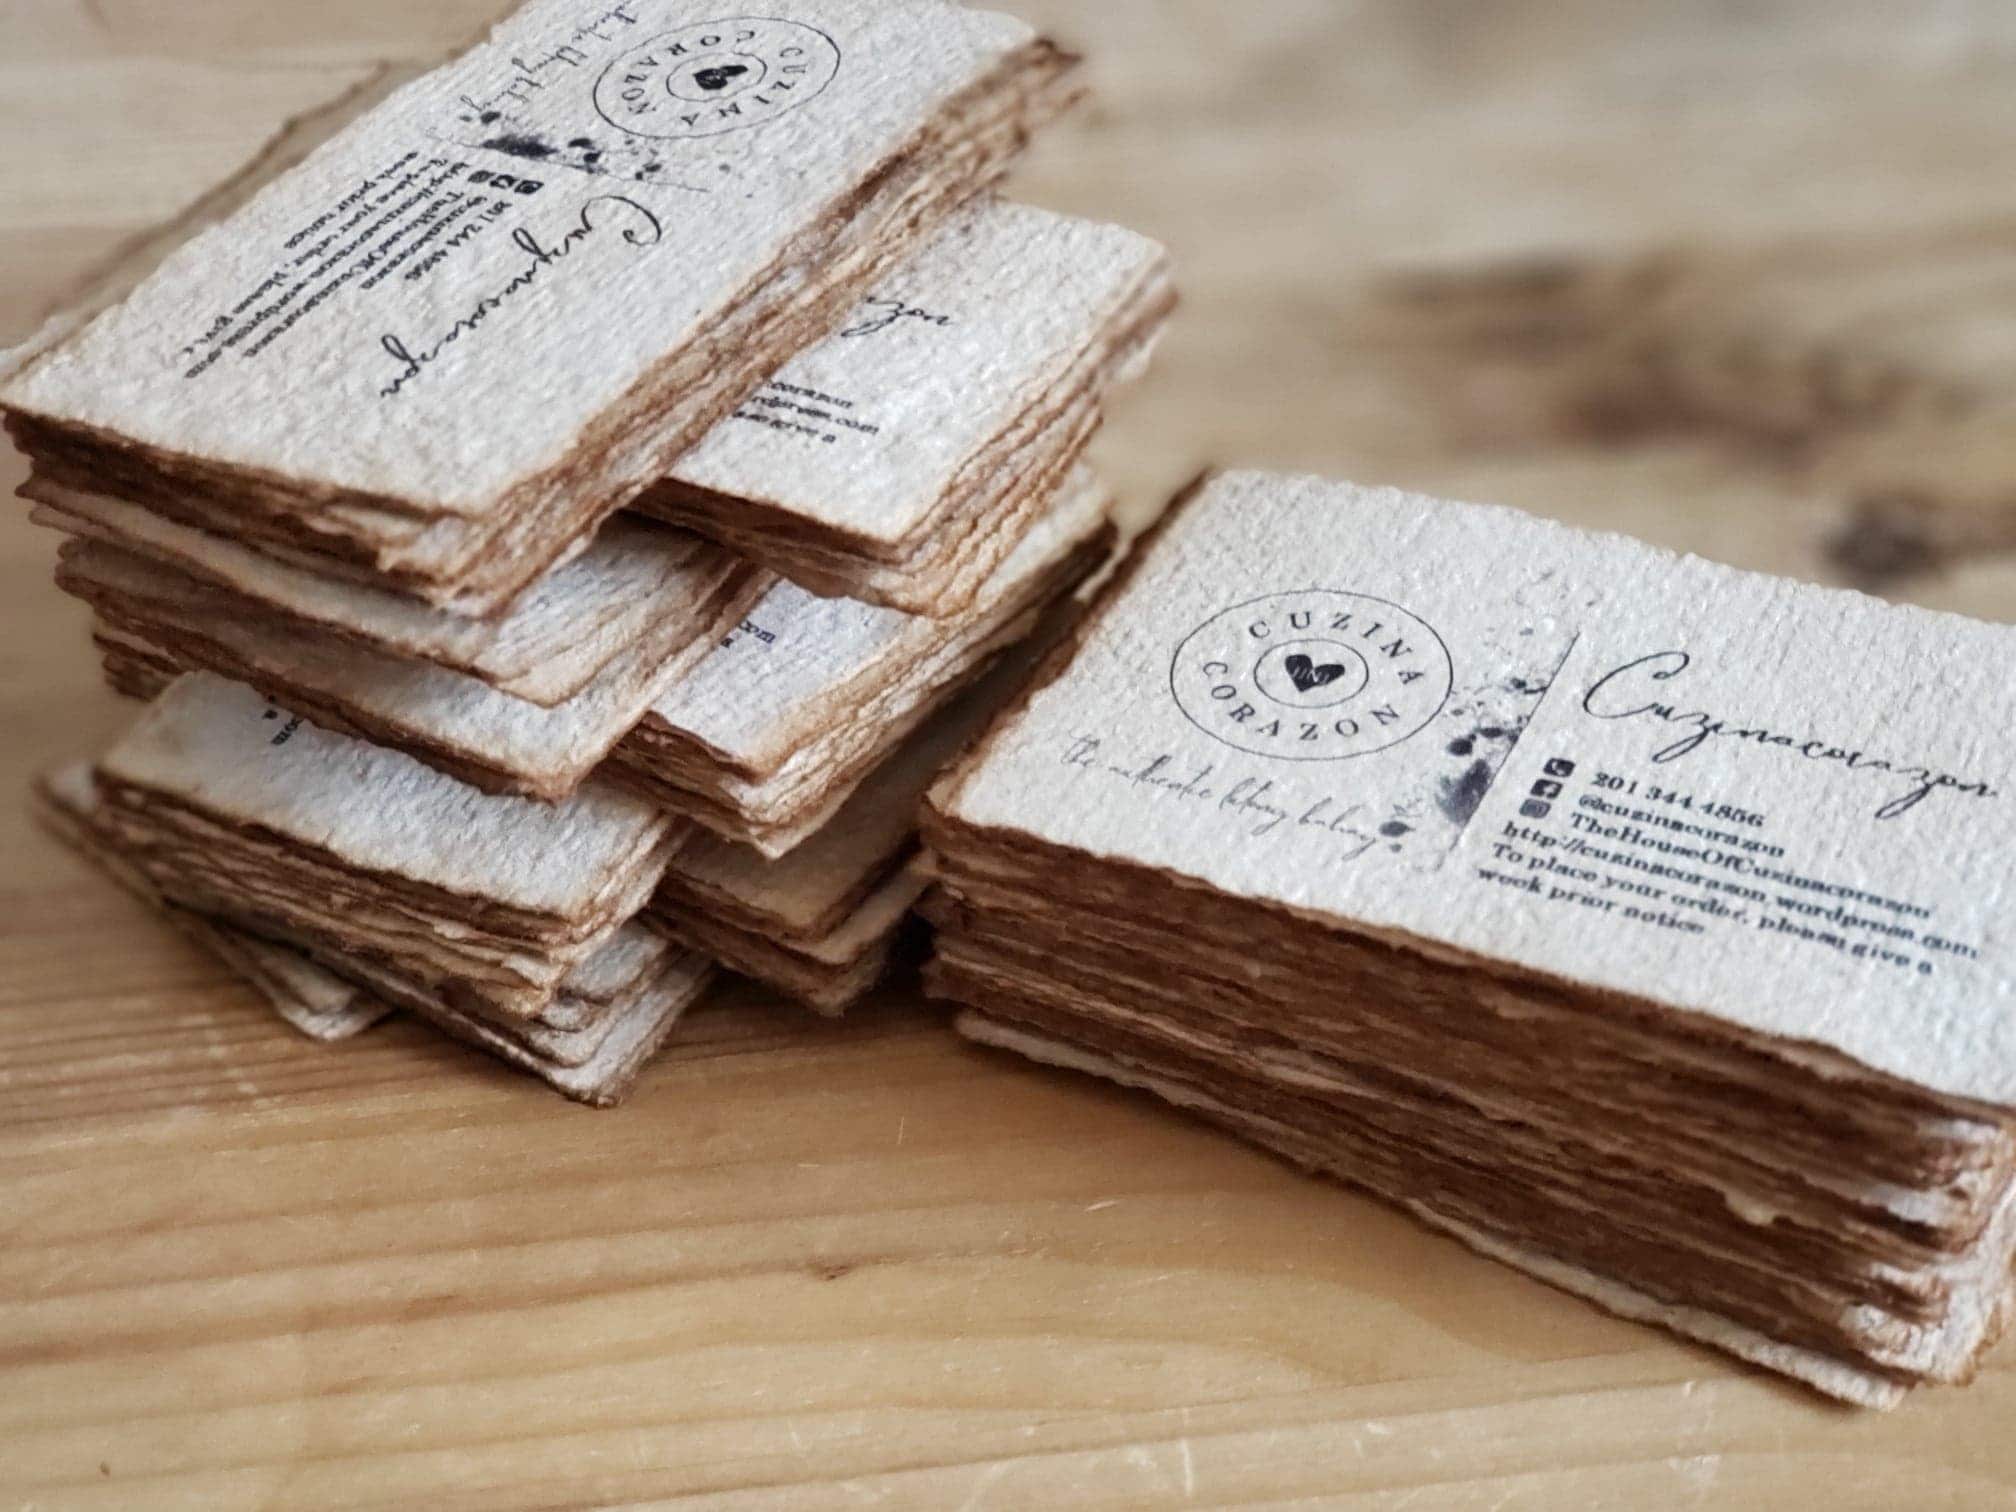 3.5 X 2 Distressed Look Personalized Printed Card/ Vintage Business Card/  Coffee Stained Paper Handmade From Recycled Paper 100 Sheets 